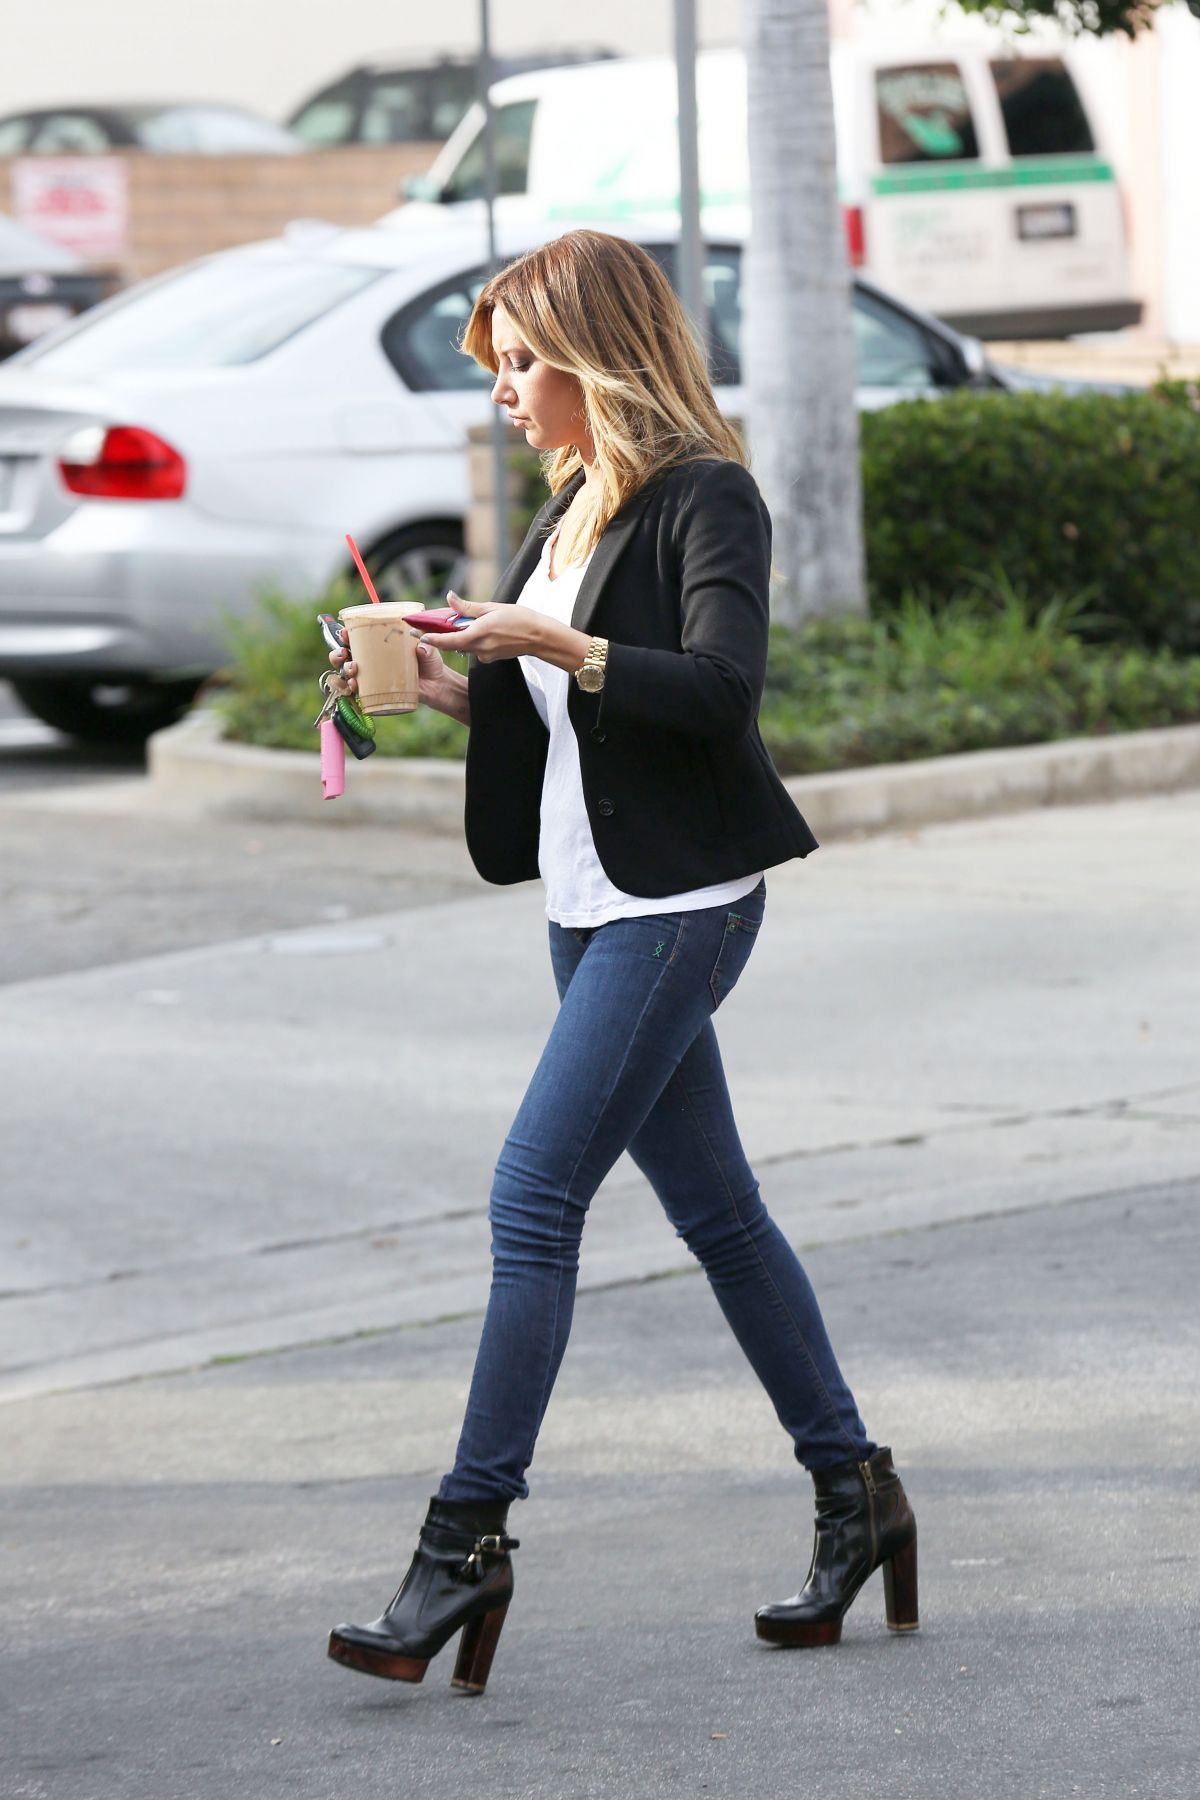 ASHLEY TISDALE in Tight Jeans Out in Los Angeles - HawtCelebs1200 x 1800